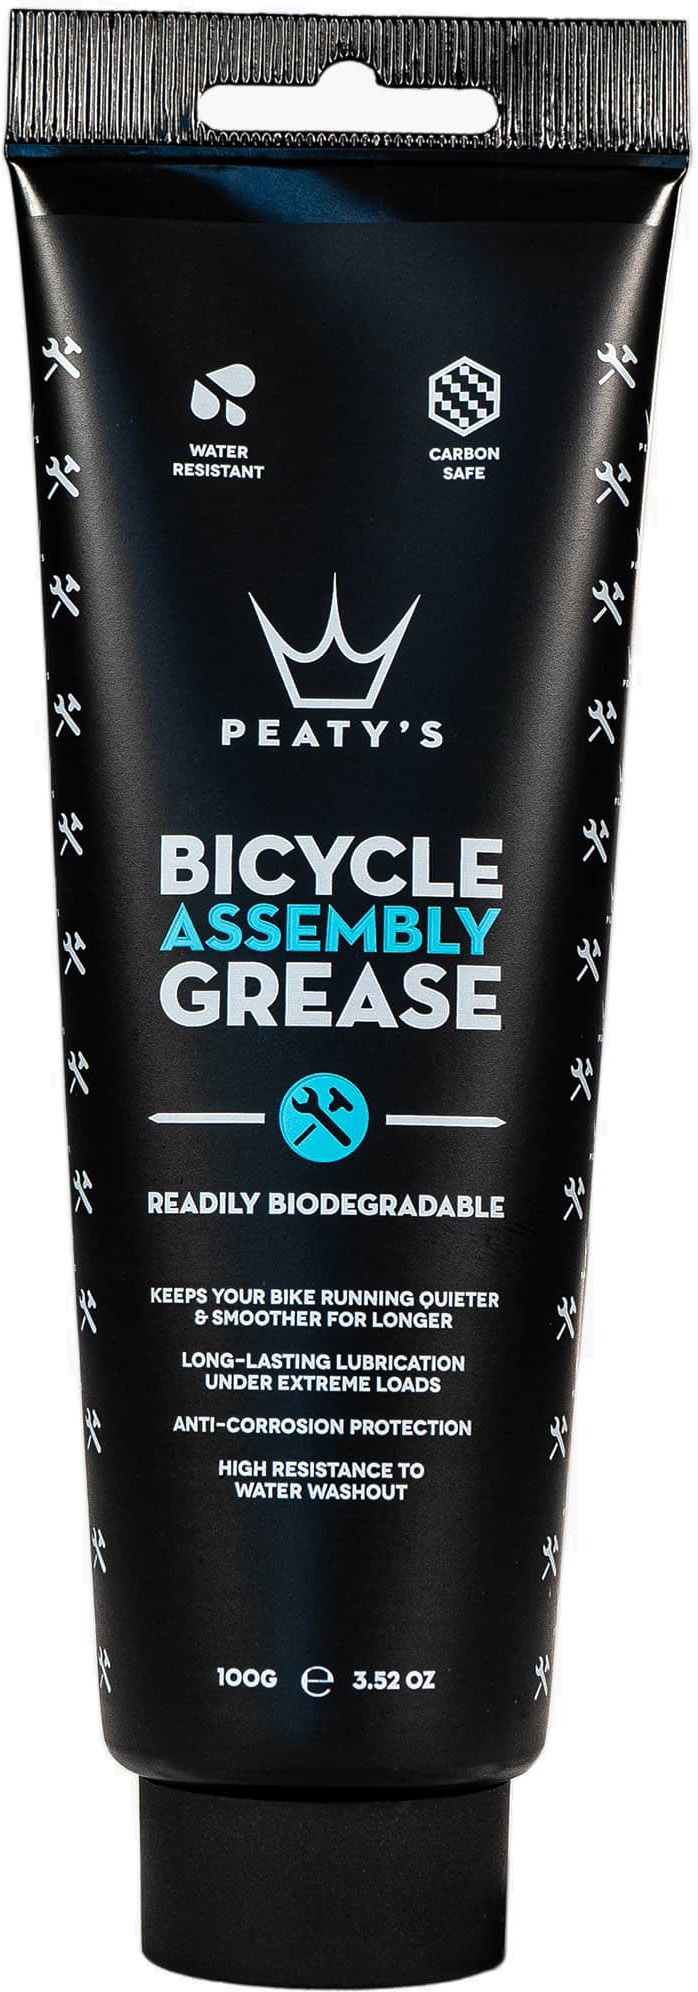 Se Peaty's Bicycle Assembly Grease 100g hos Cykelexperten.dk